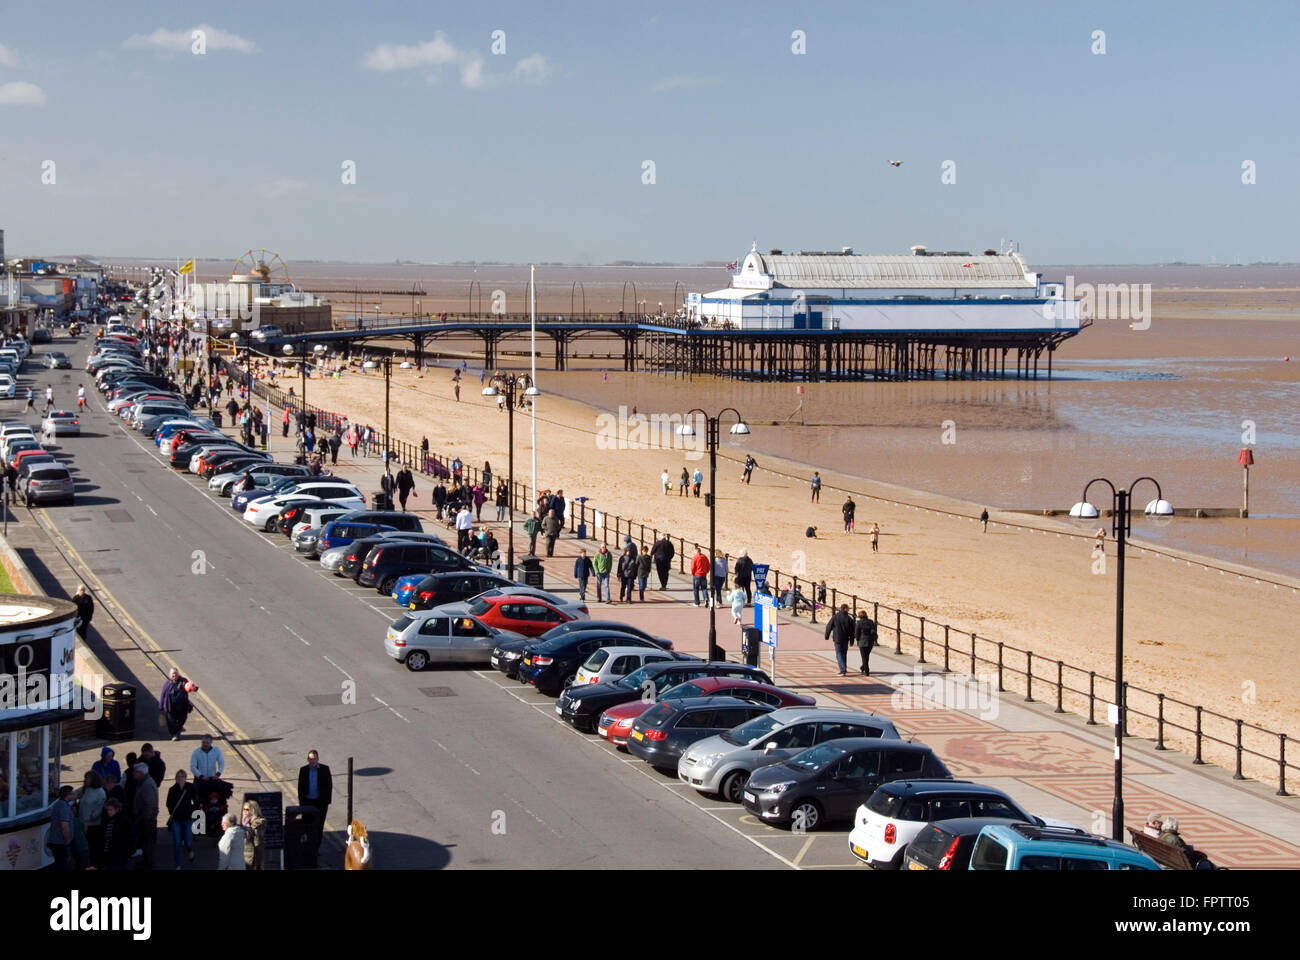 Cleethorpes, Lincolnshire, UK - 18 April 2014: overlooking the Central Promenade on 18 April at Cleethorpes Stock Photo